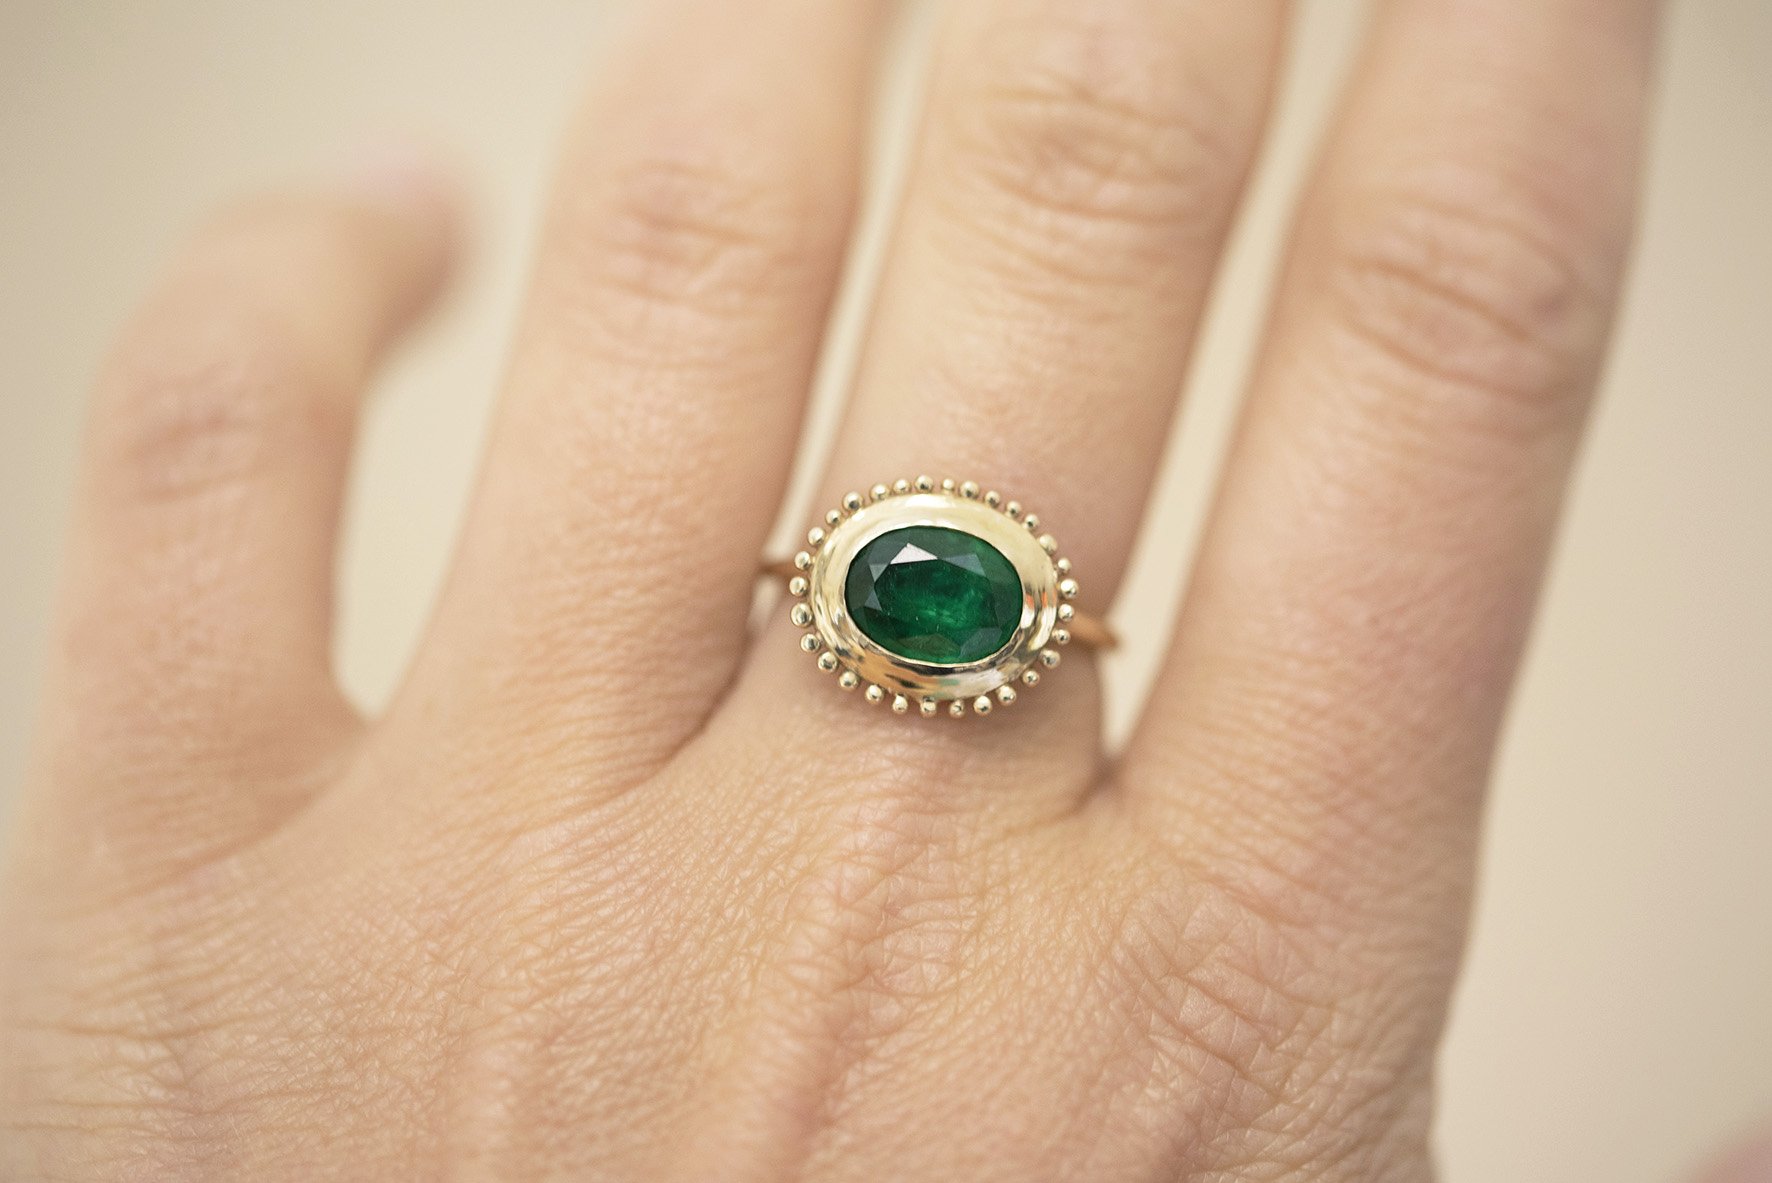  A slim gold band with a large oval emerald with a gold surround is the perfect, modern engagement ring. 